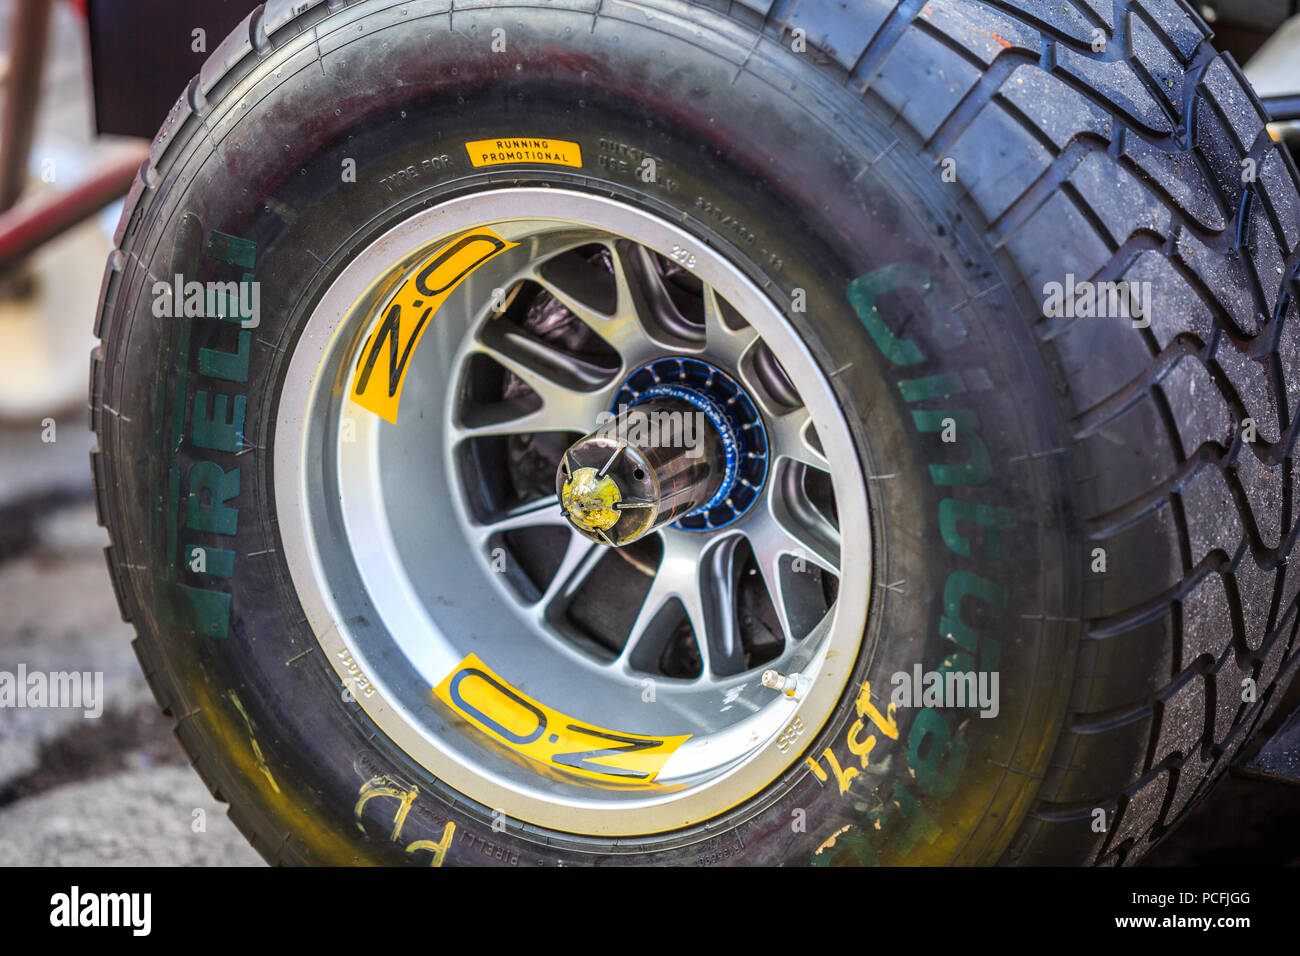 Mexico City, Mexico - July 08, 2015: Ferrari F1 F60 Pirelli Cinturato Rear  Wet Tire with the legend "Tire For Running Promotional". At the Scuderia  Ferrari Street Demo By Telcel - Infinitum Stock Photo - Alamy